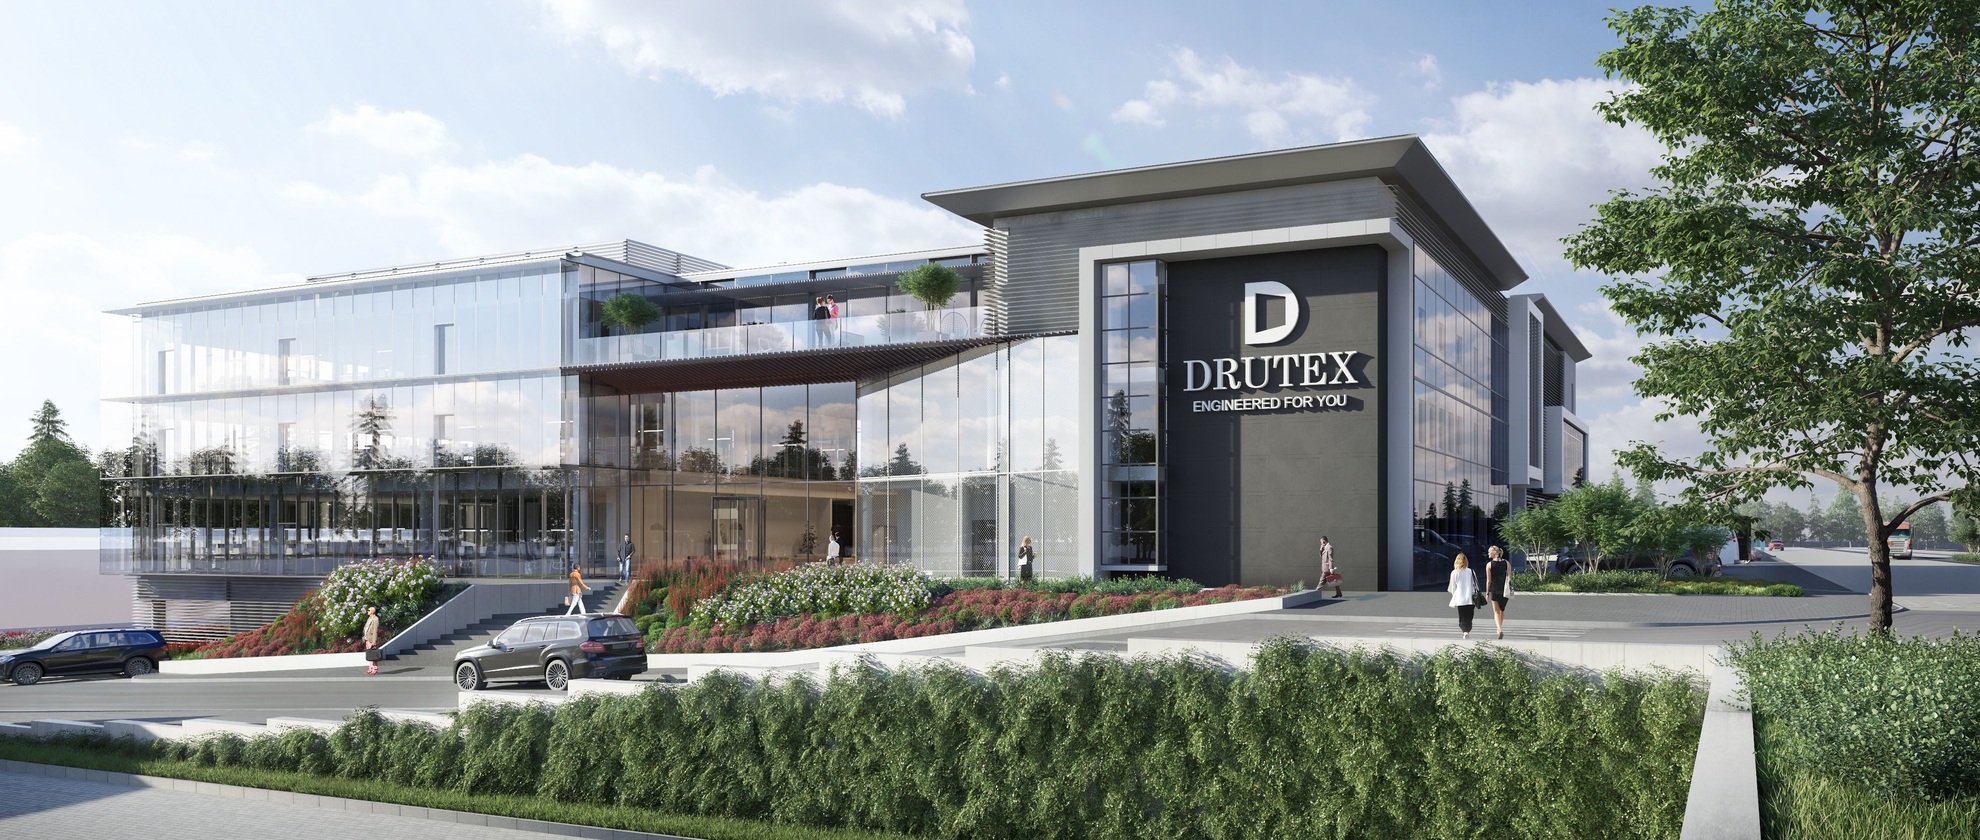 Drutex has launched the construction of one of the most cutting-edge office buildings in Poland